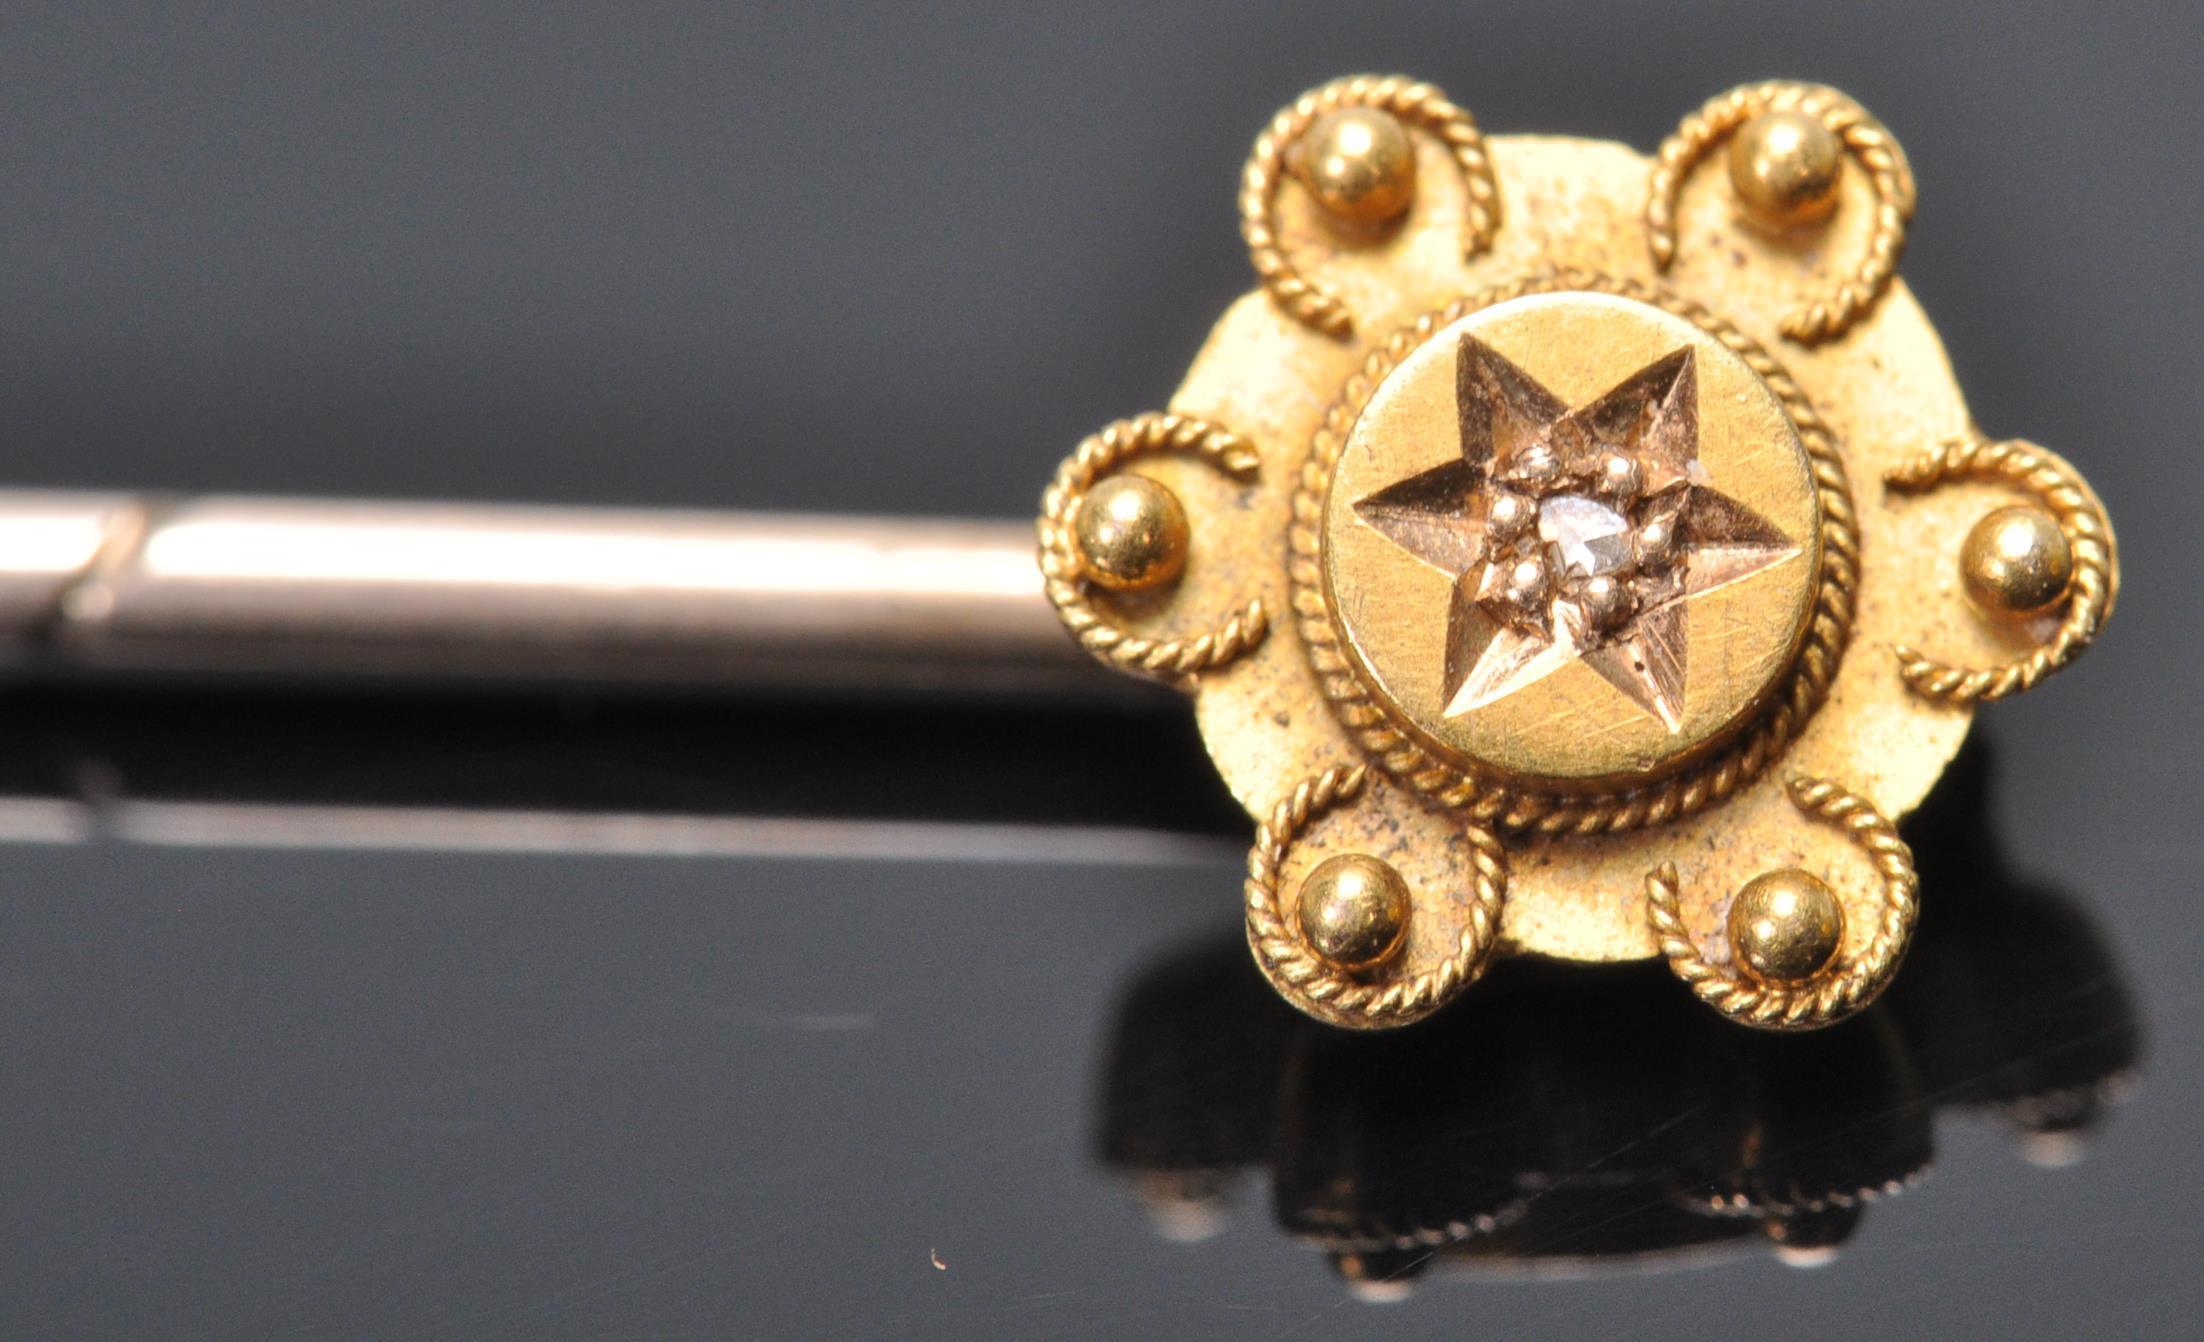 A 9ct gold toped tie pin having wire work and ball finial decoration set with a single diamond chip. - Image 2 of 5